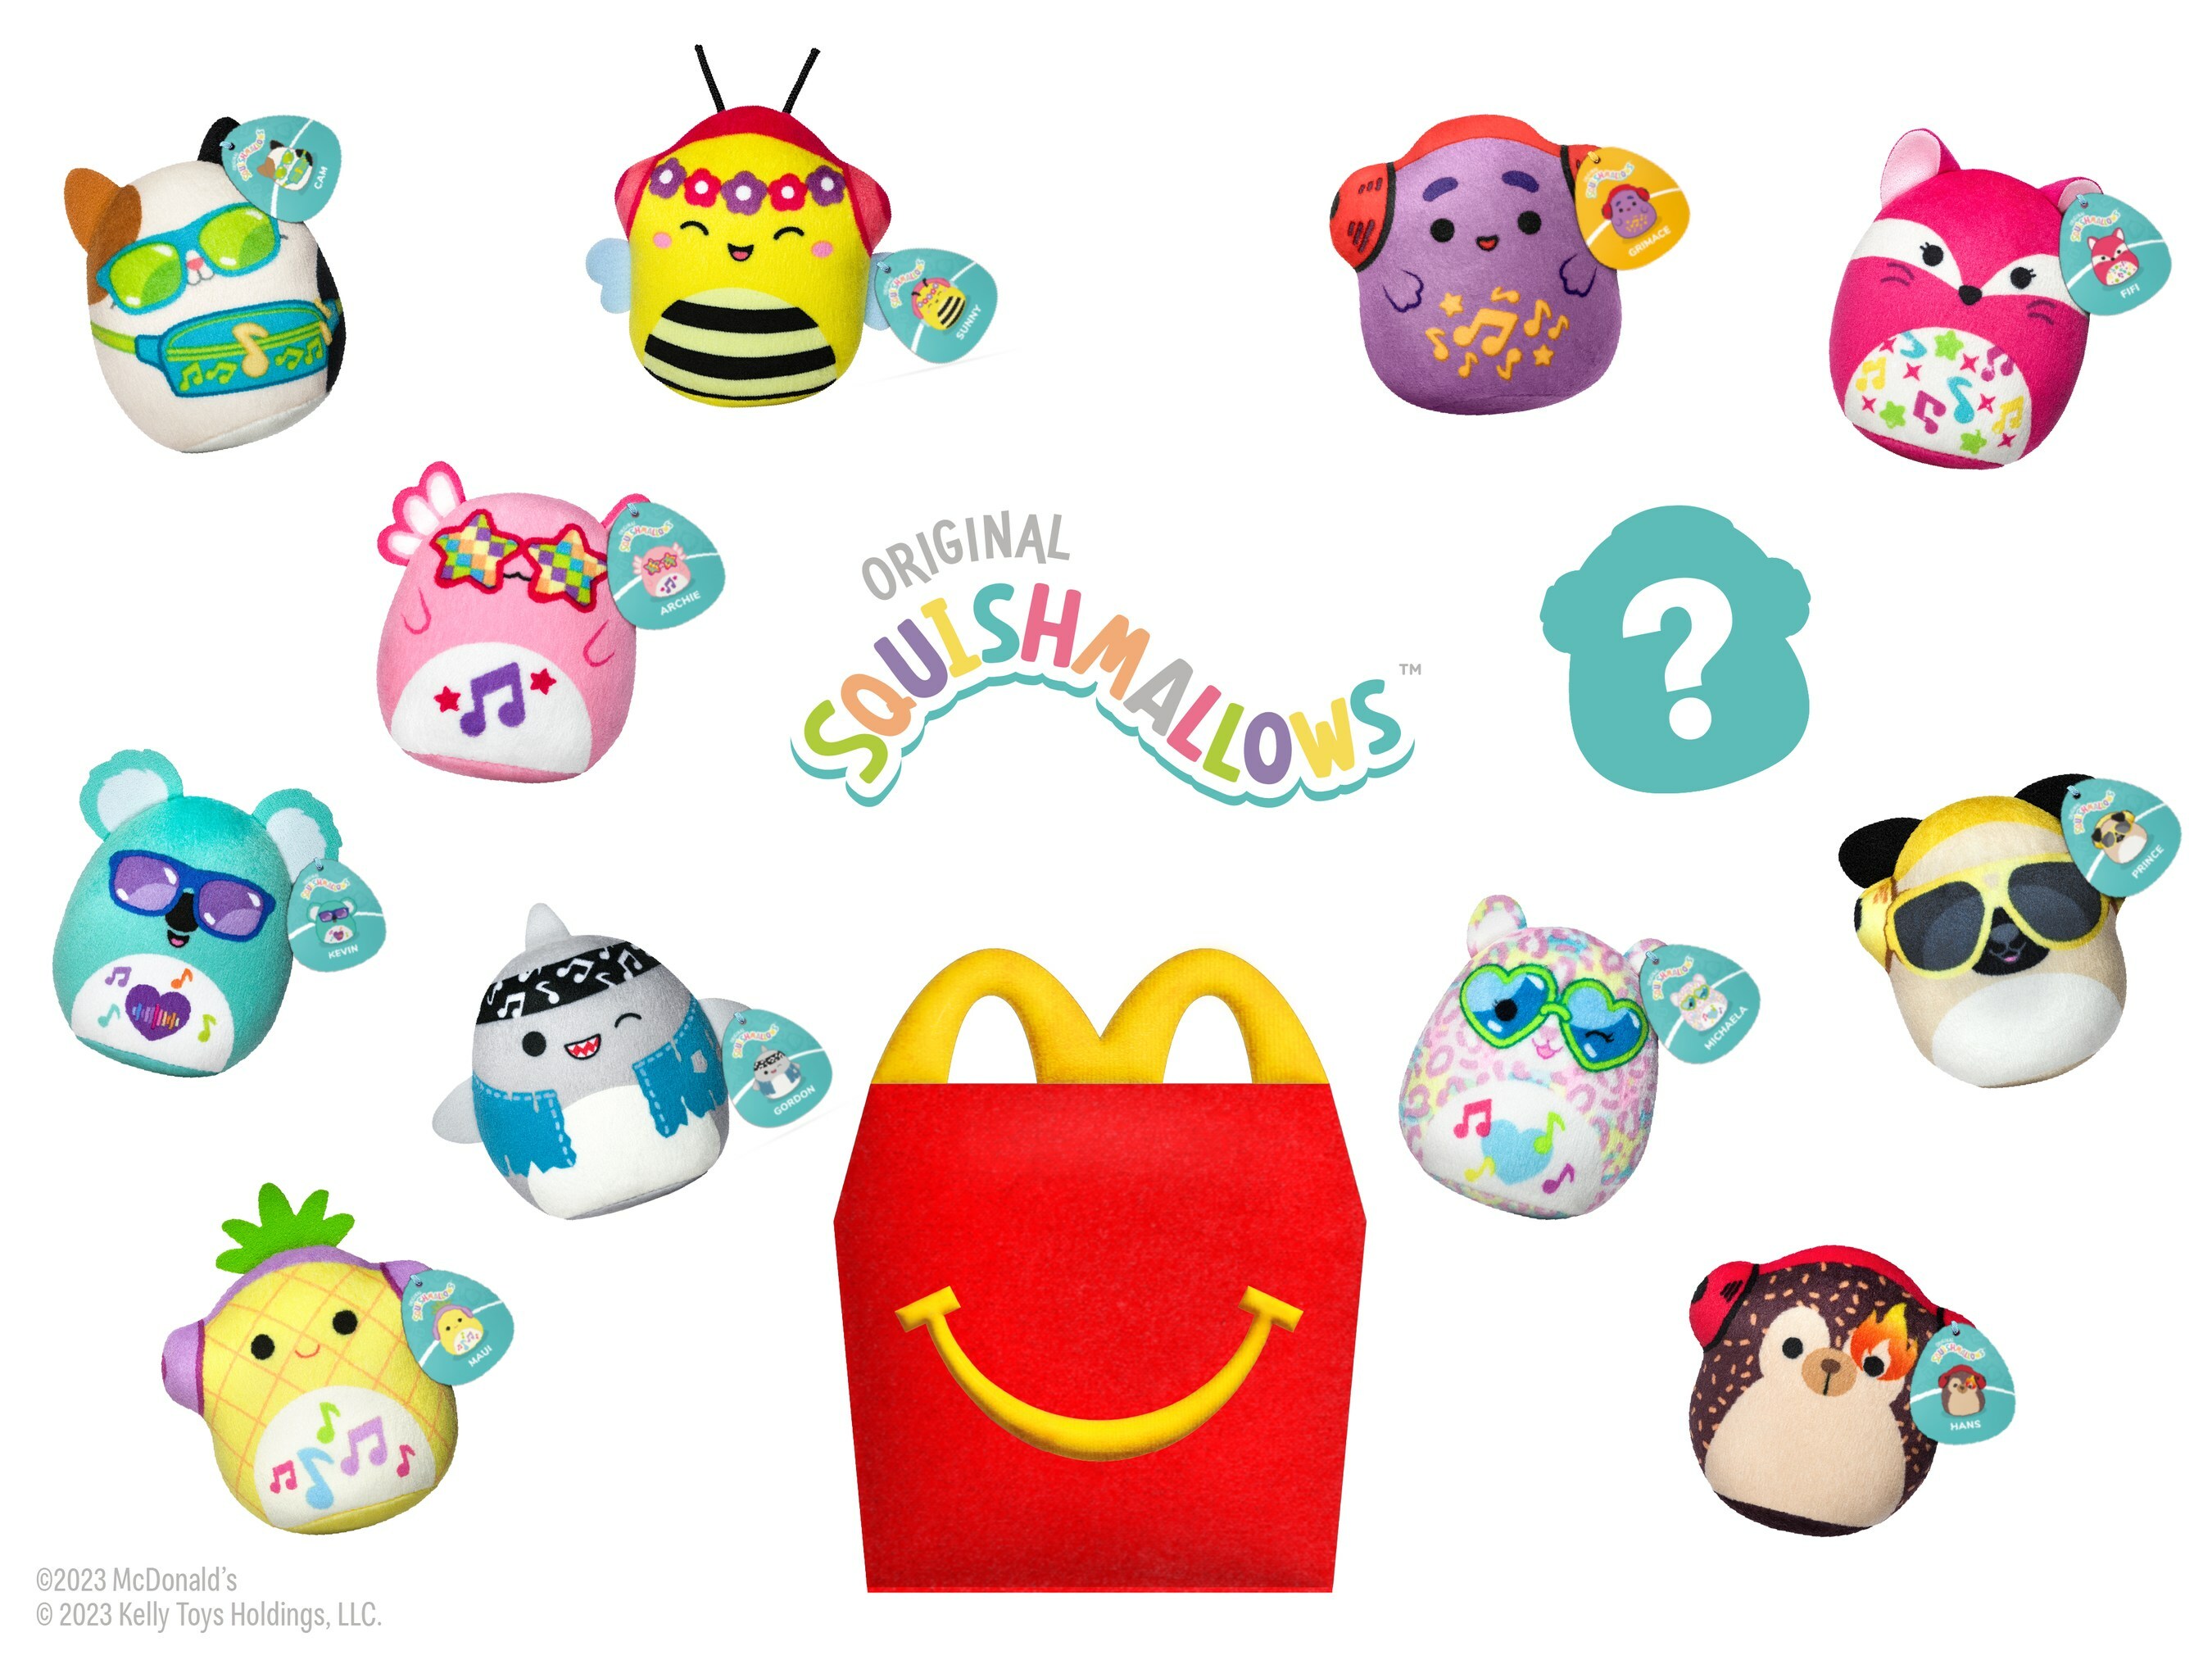 McDonald's finally reveals when Squishmallows will come to Happy Meals